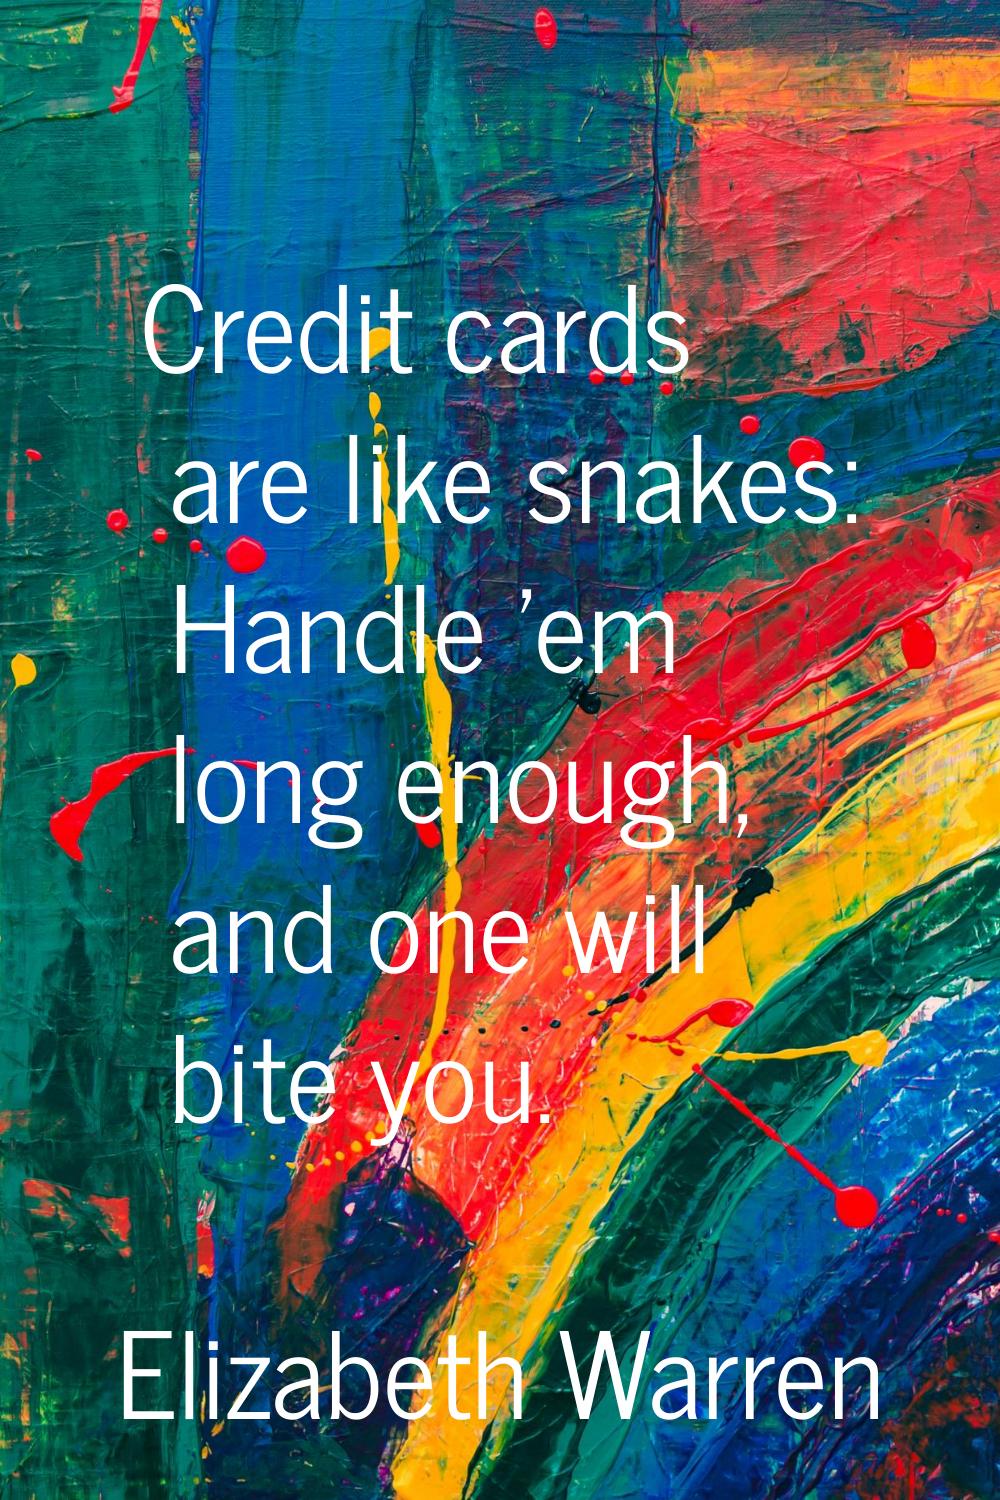 Credit cards are like snakes: Handle 'em long enough, and one will bite you.